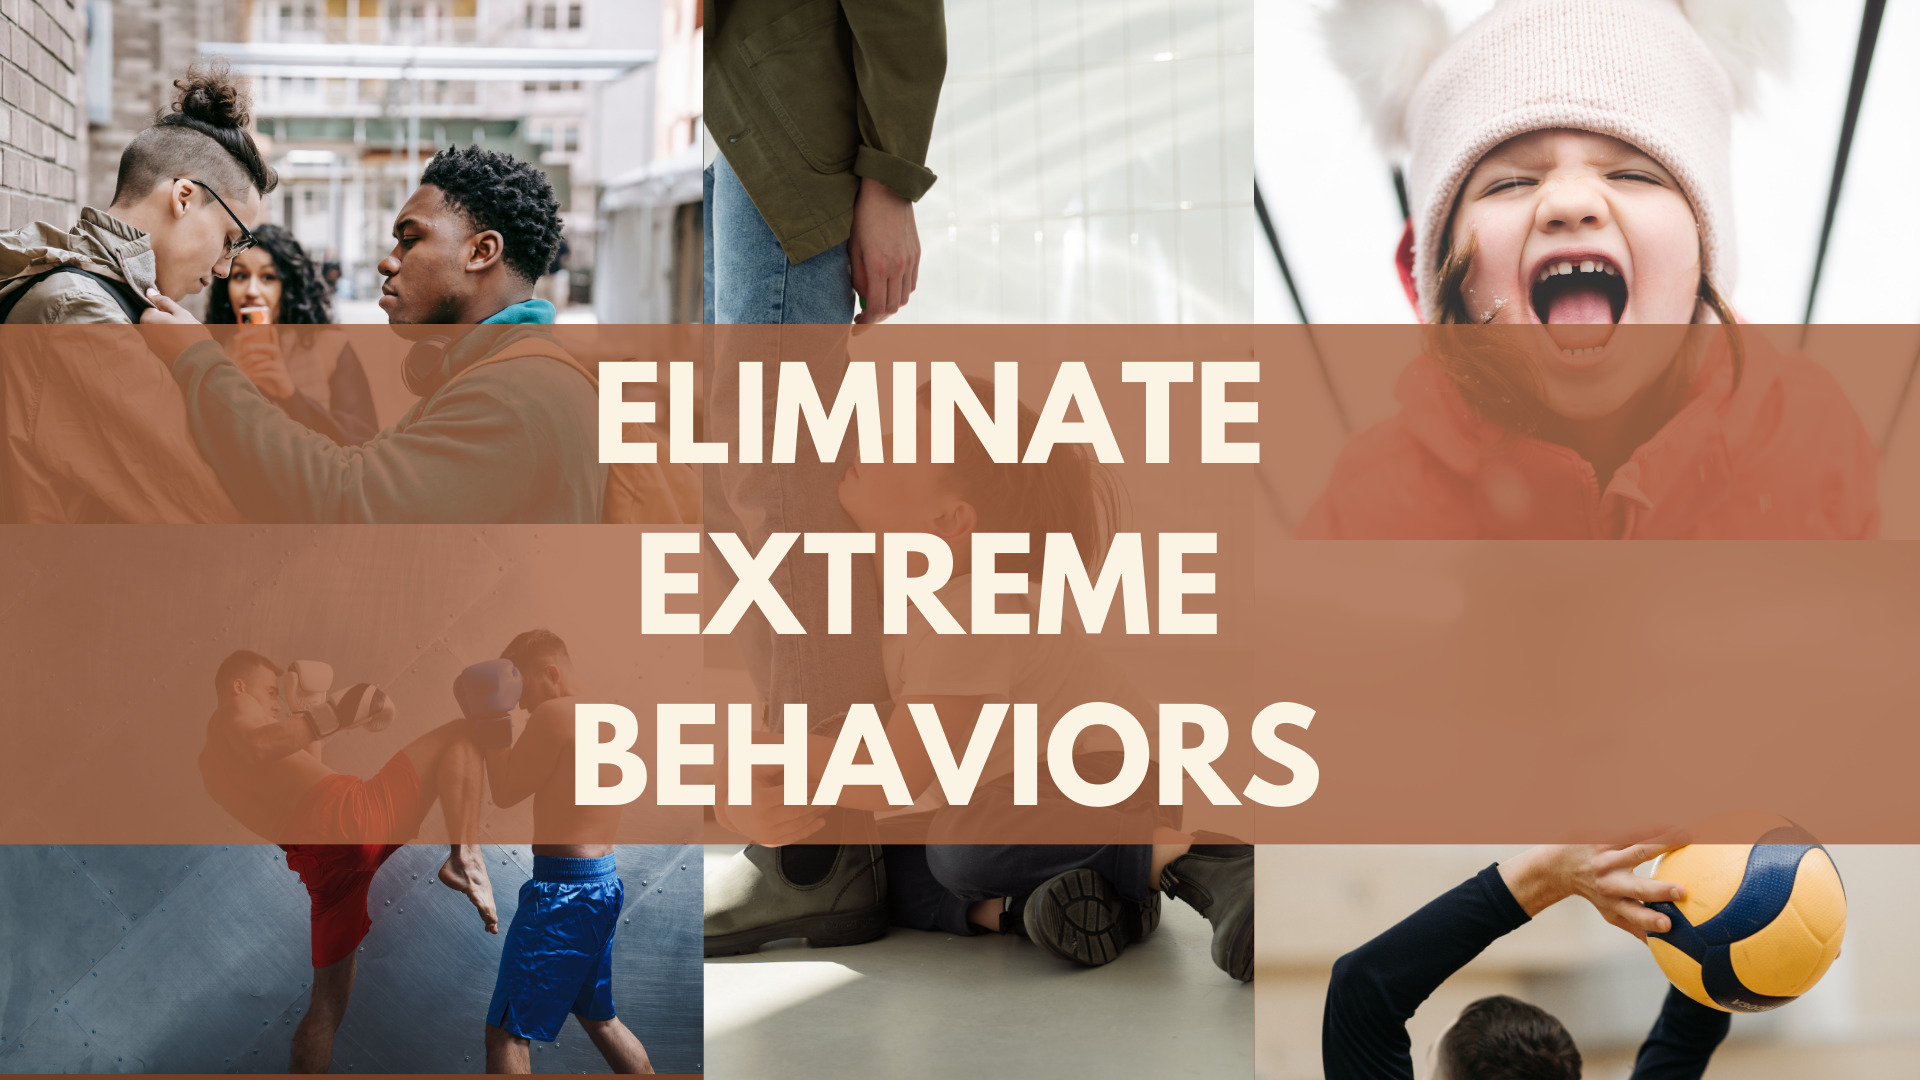 Educator Workshop: Dealing with Extreme Behaviors